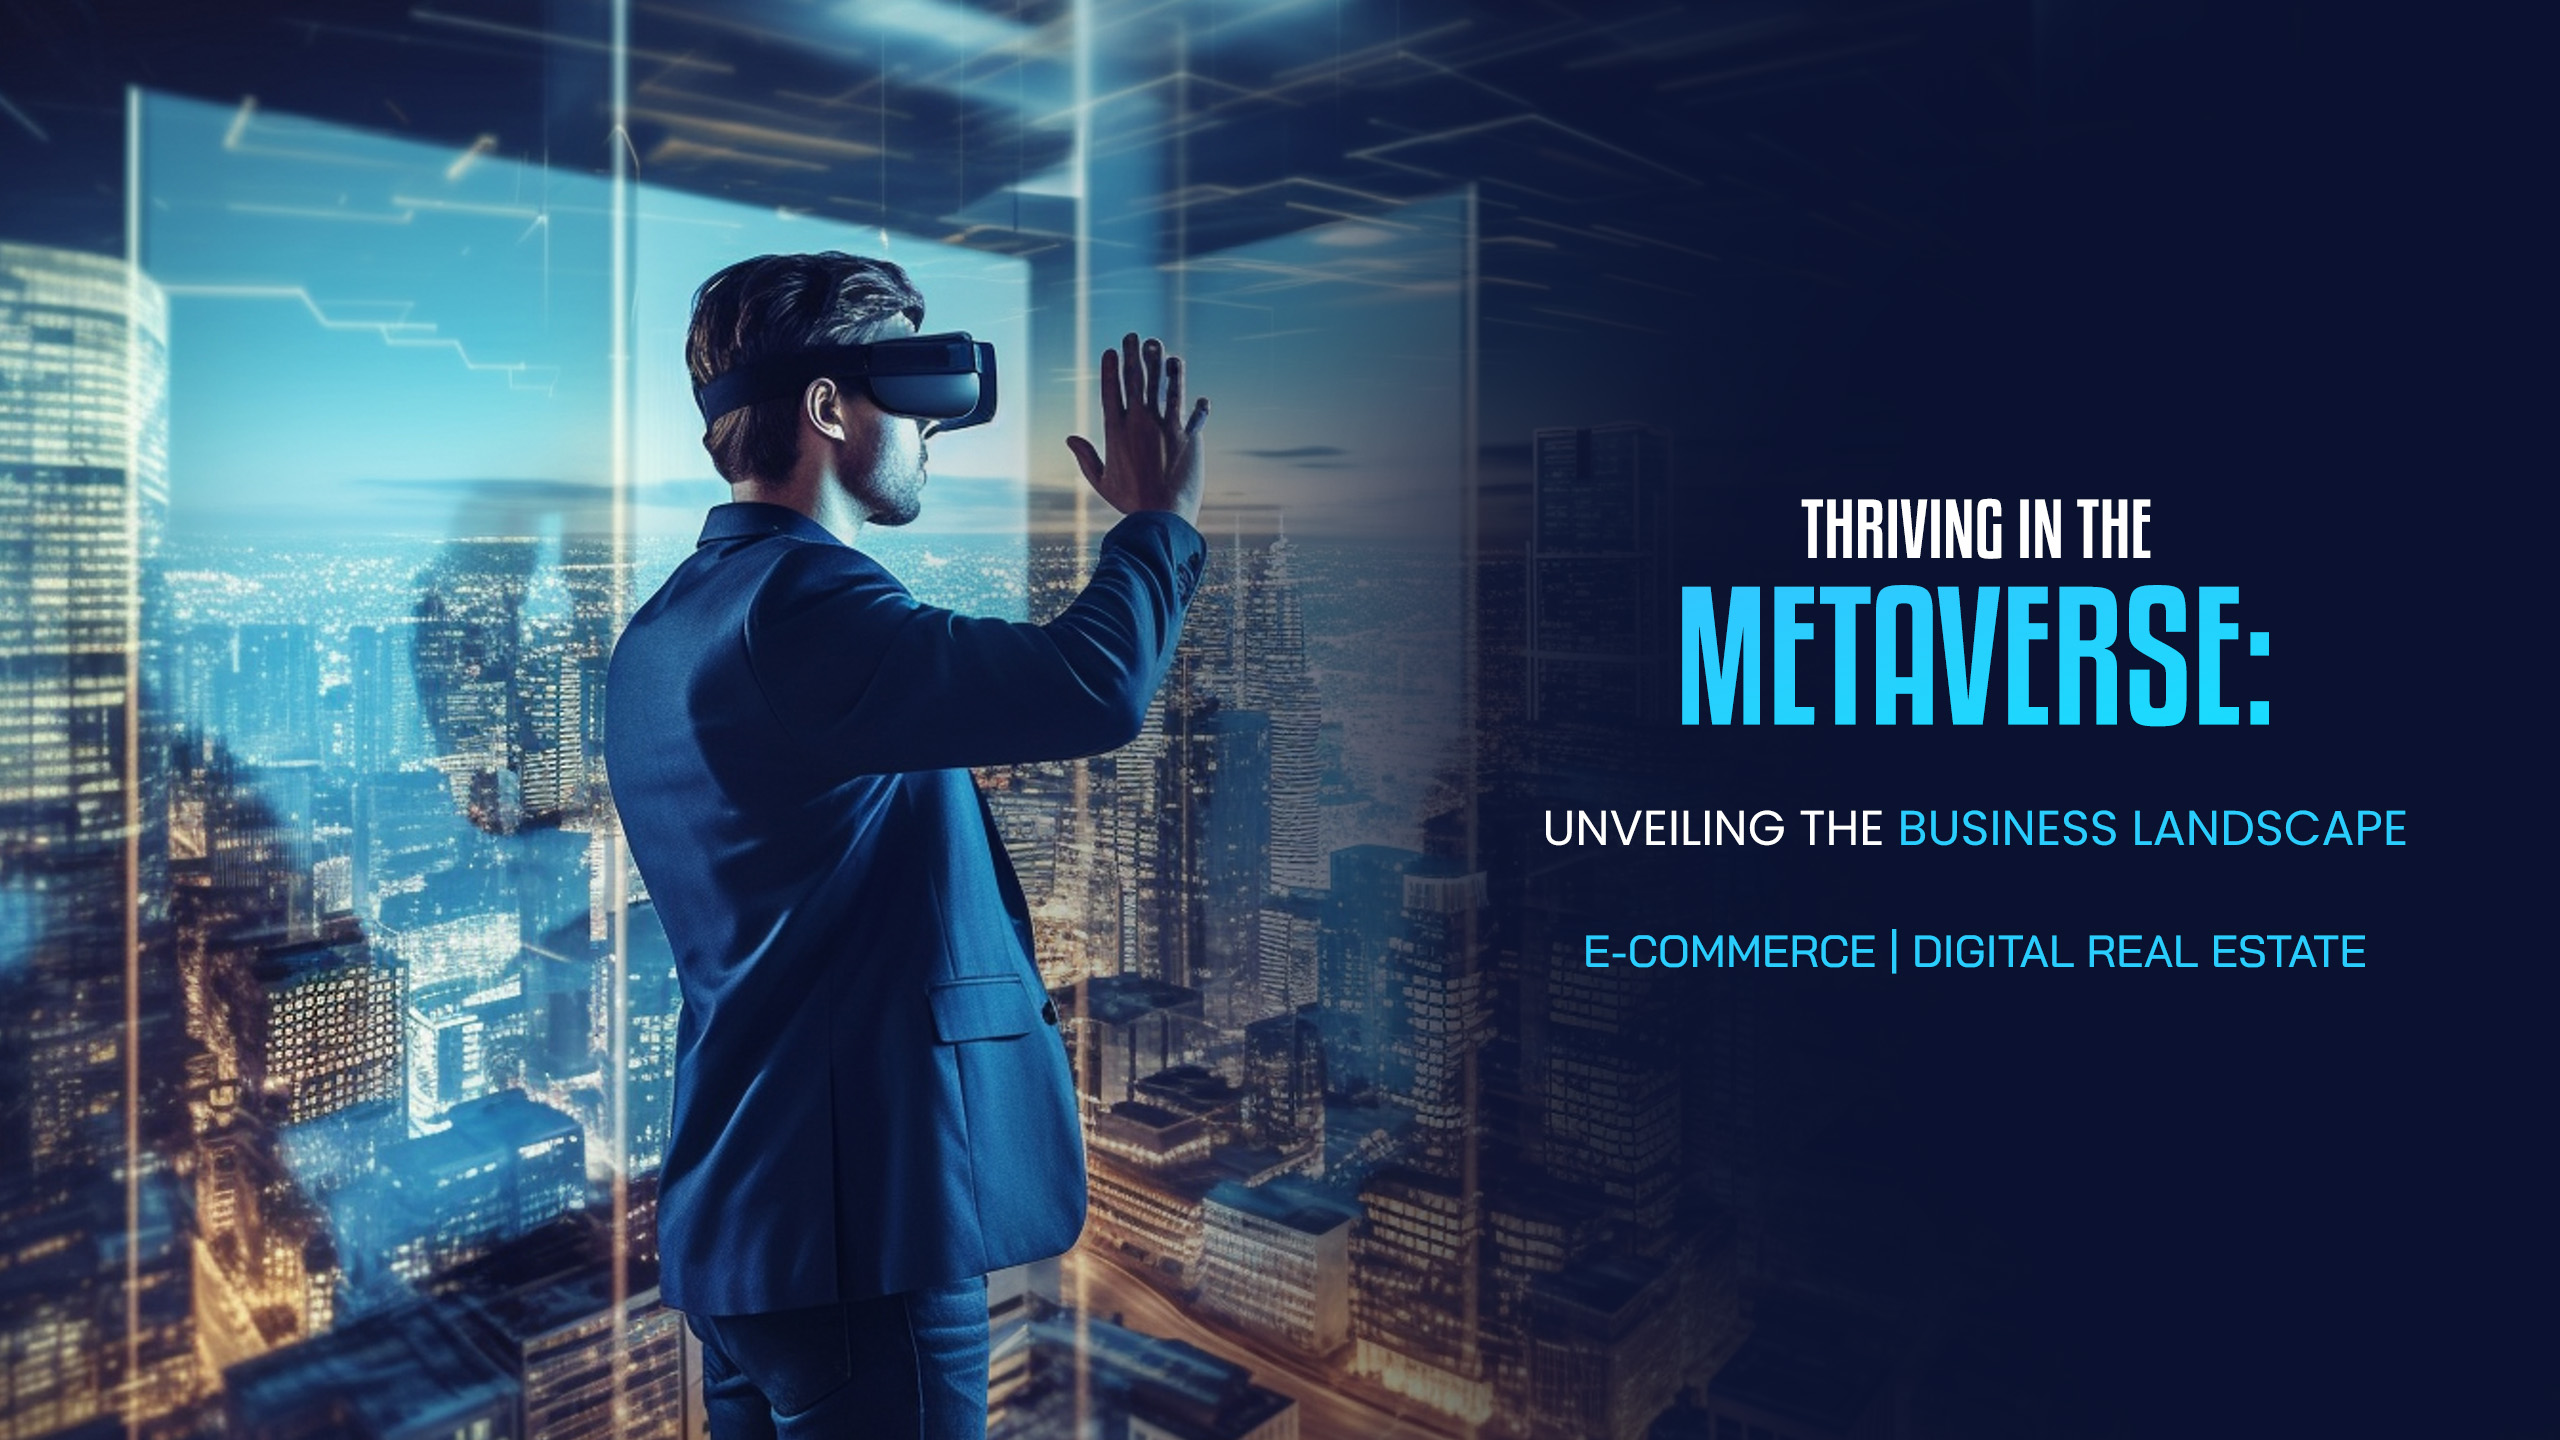 Business Landscape in the Metaverse